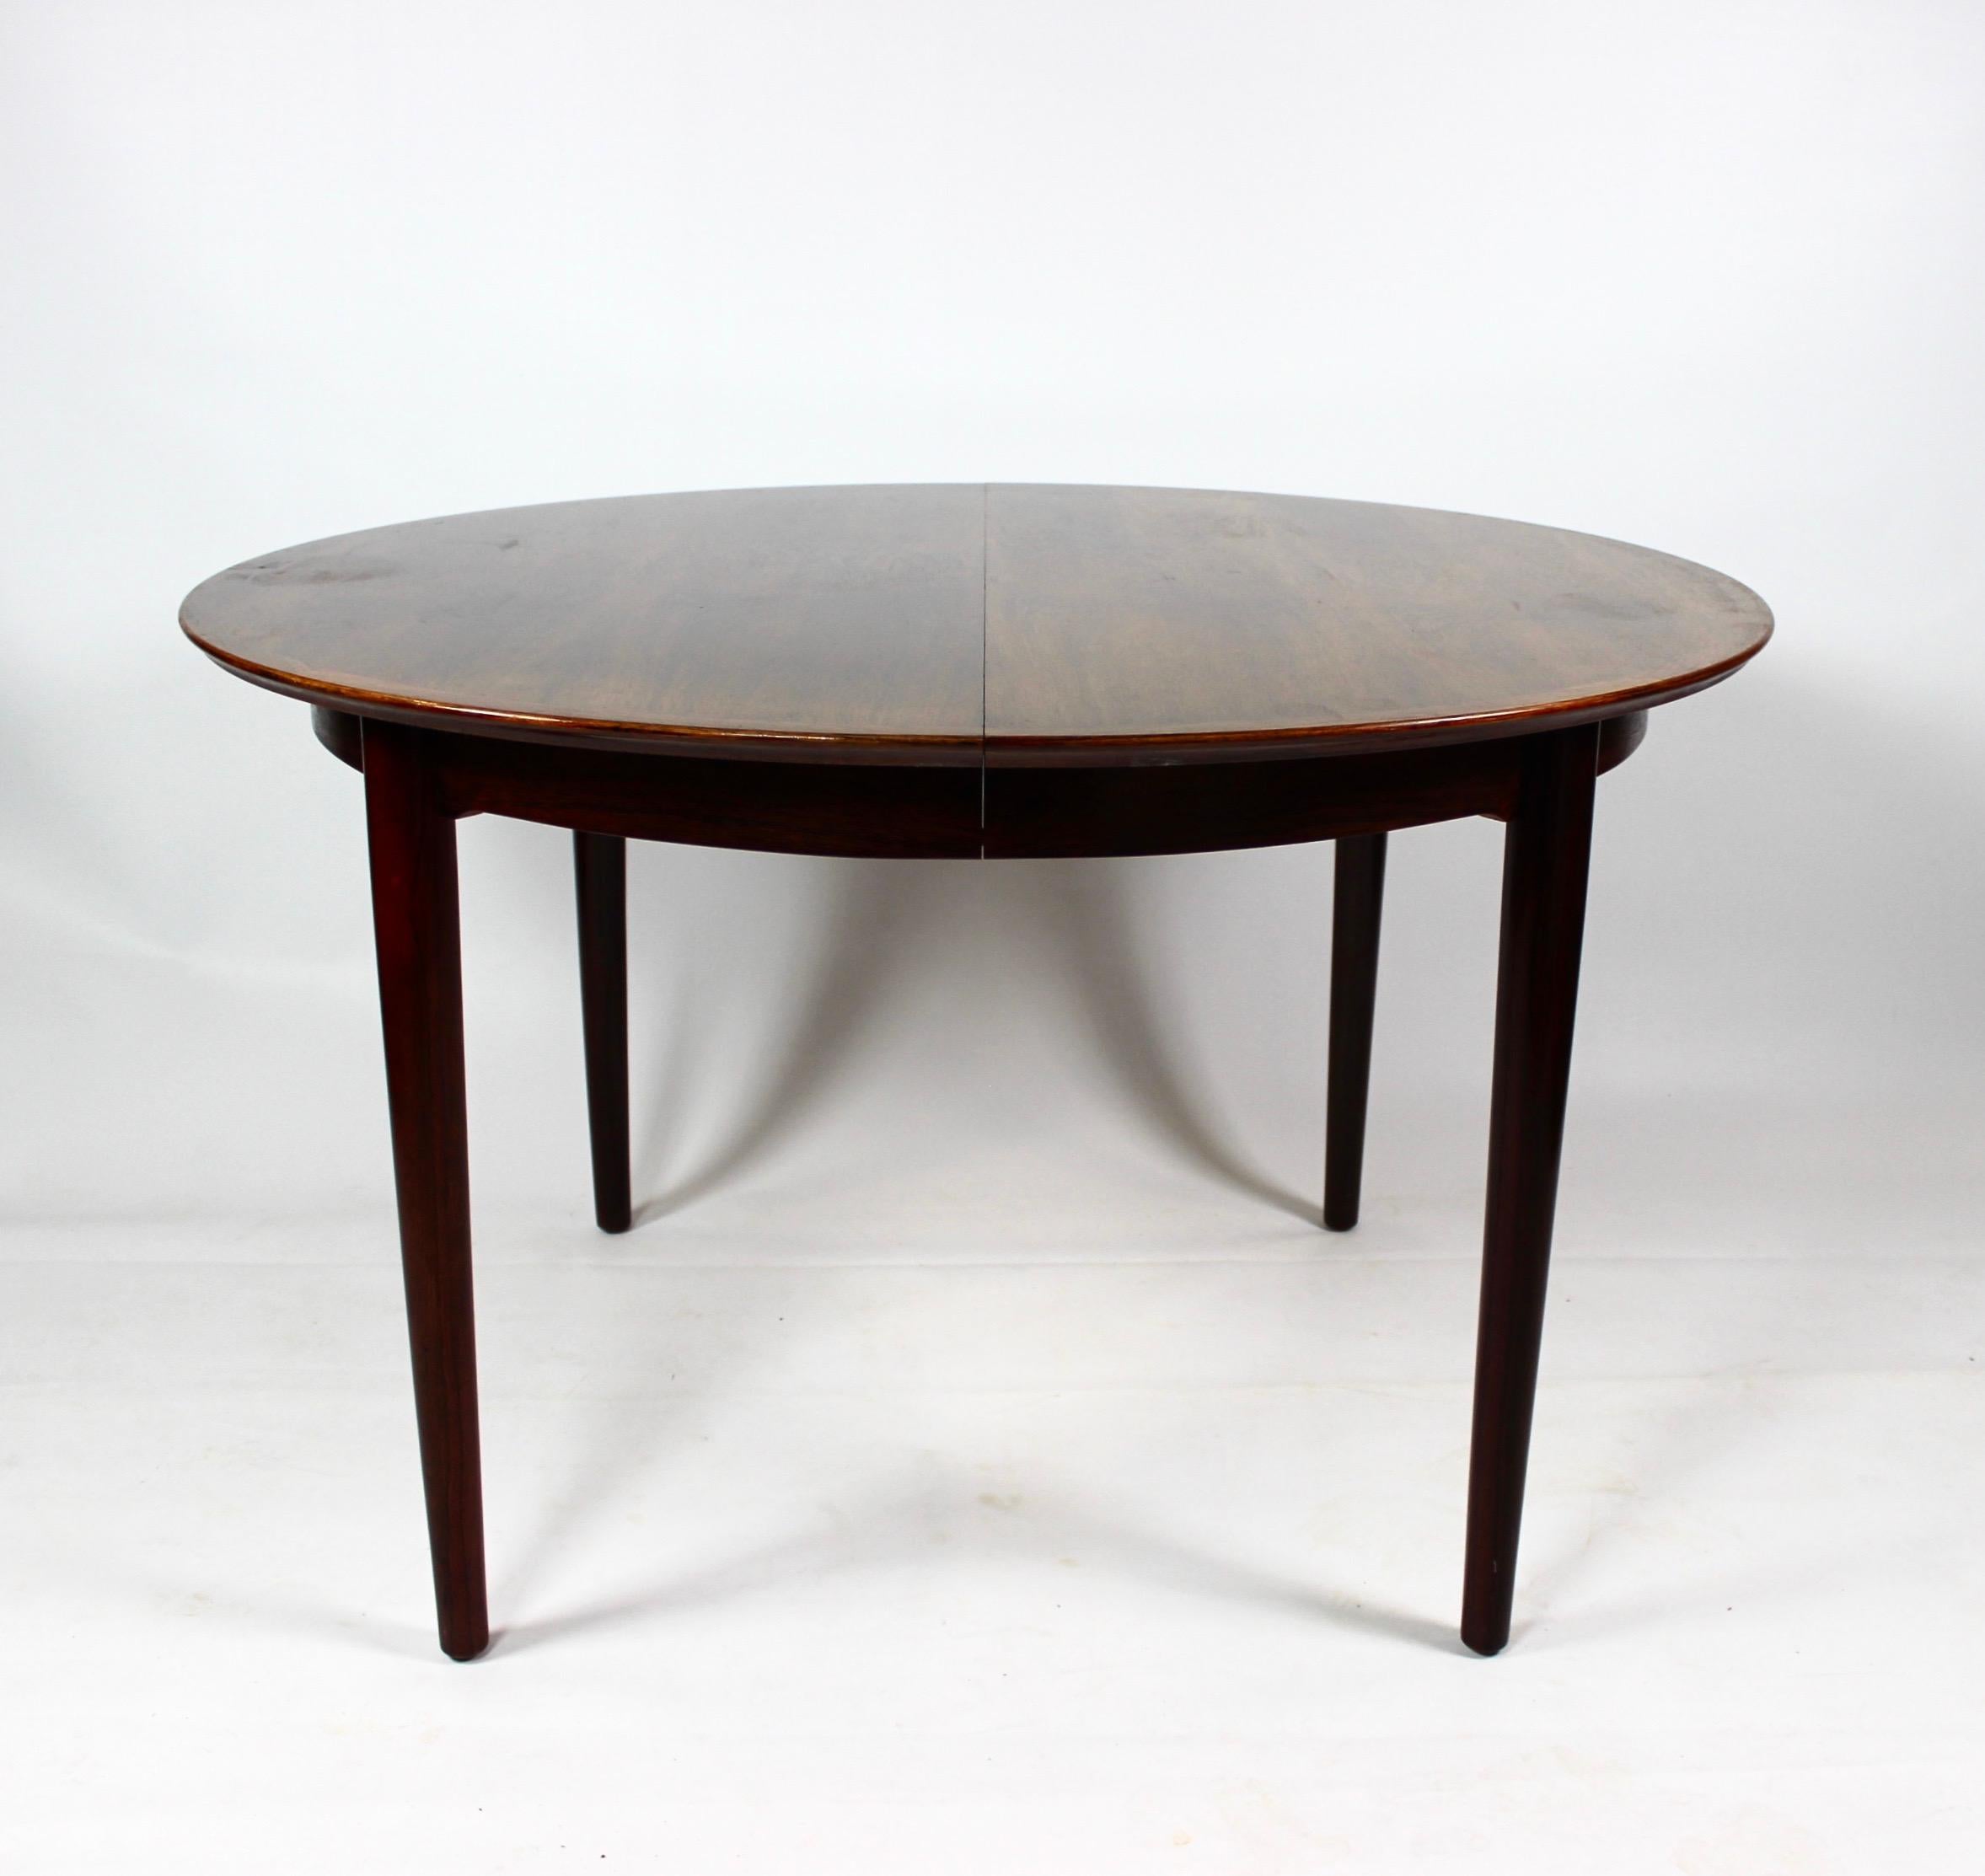 The dining table, crafted from exquisite rosewood and featuring two extension plates, is a quintessential example of Danish design from the 1960s. Designed by the renowned Danish architect and furniture designer Arne Vodder, this piece embodies the